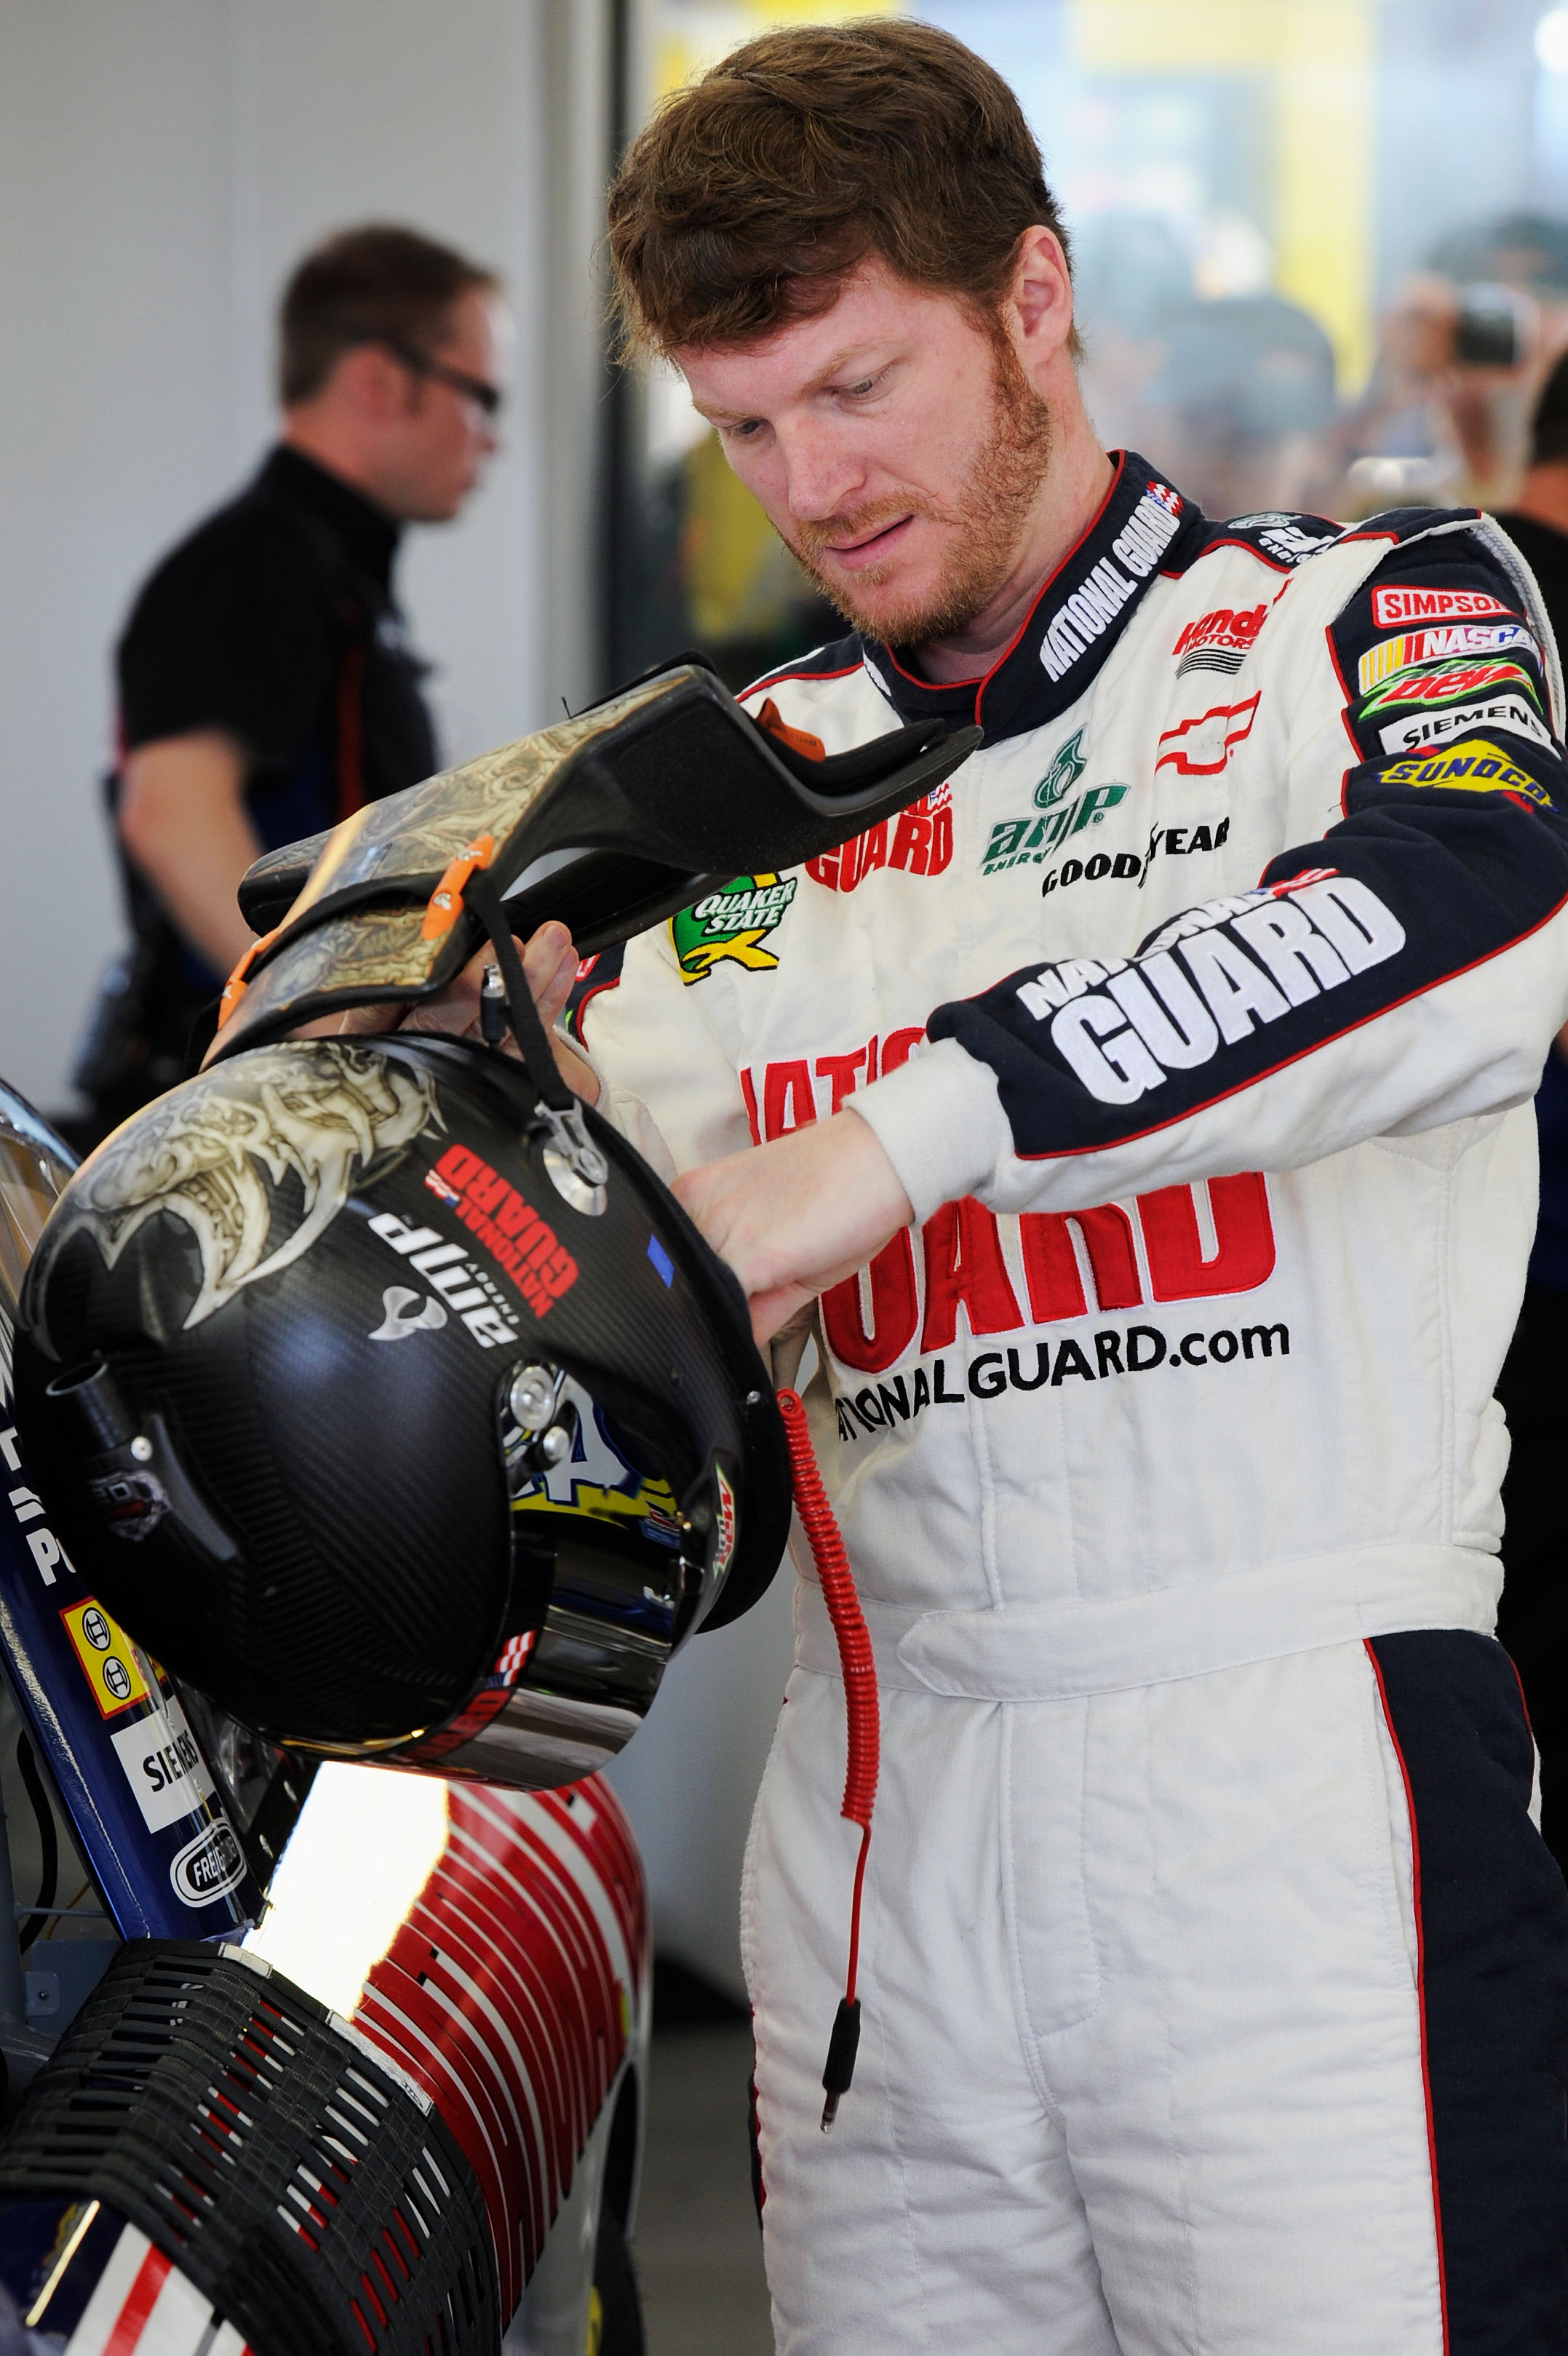 LAS VEGAS, NV - MARCH 05:  Dale Earnhardt Jr., driver of the #88 National Guard/Amp Energy Chevrolet, stands in the garage during practice for the NASCAR Sprint Cup Series Kobalt Tools 400 at Las Vegas Motor Speedway on March 5, 2011 in Las Vegas, Nevada.